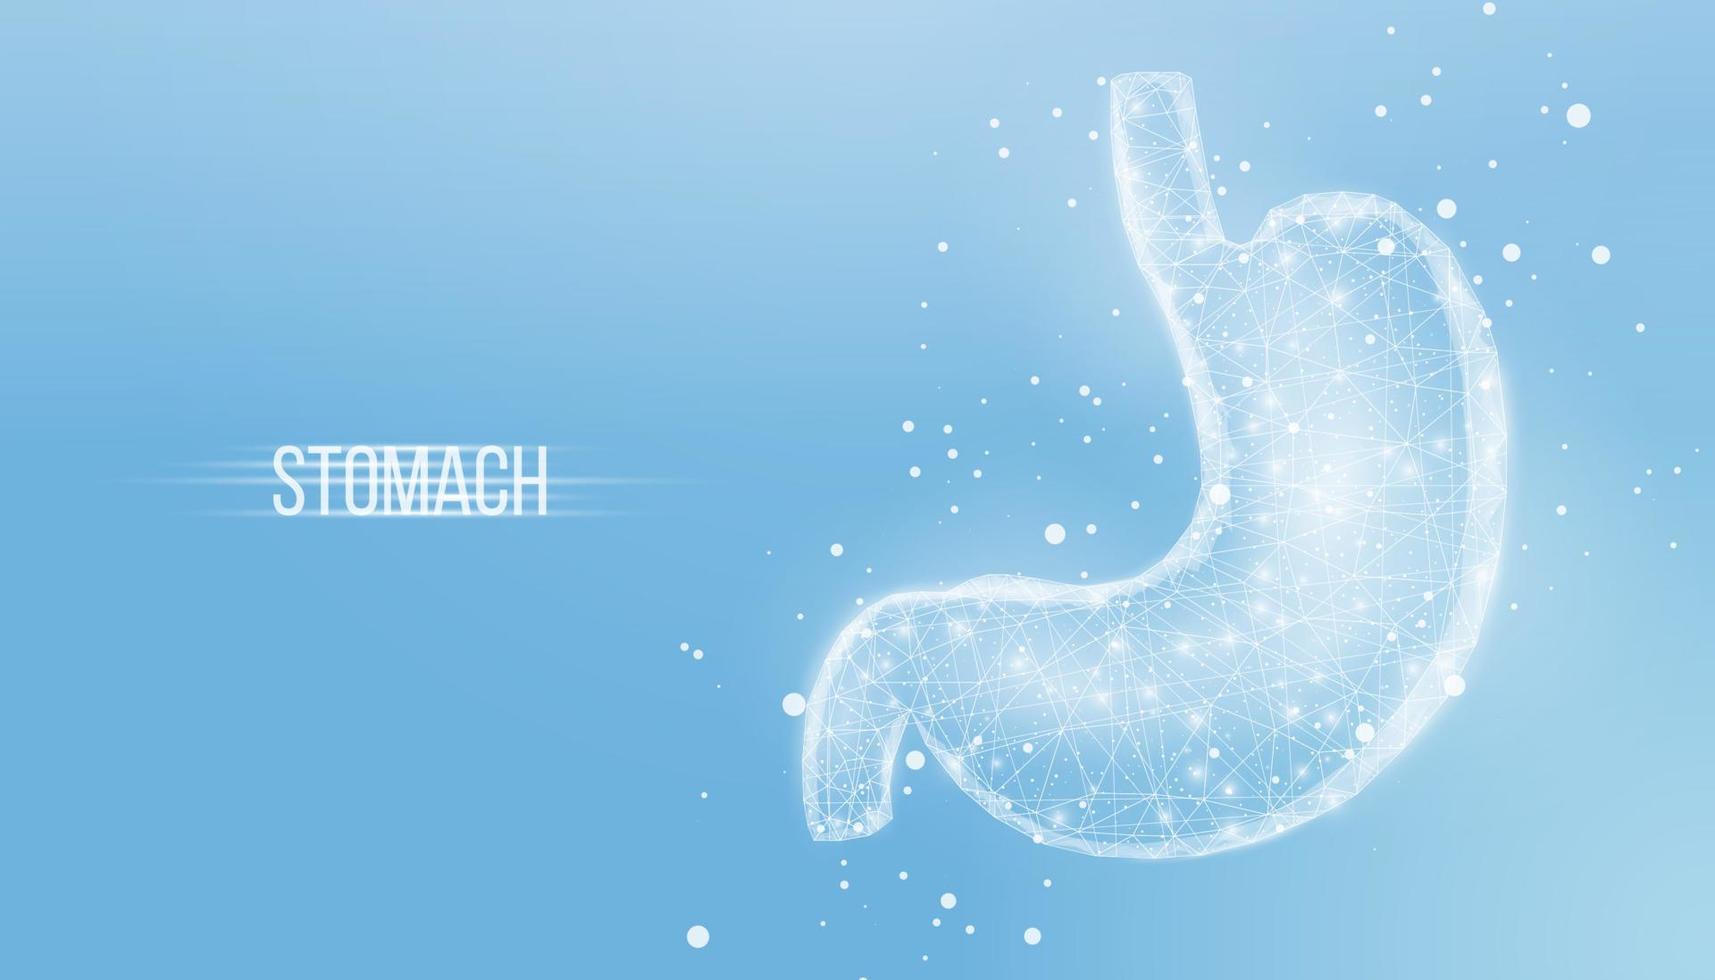 Human stomach. Wireframe low poly style. Concept for medical, treatment of the digestive system. Abstract modern 3d vector illustration on blue background.